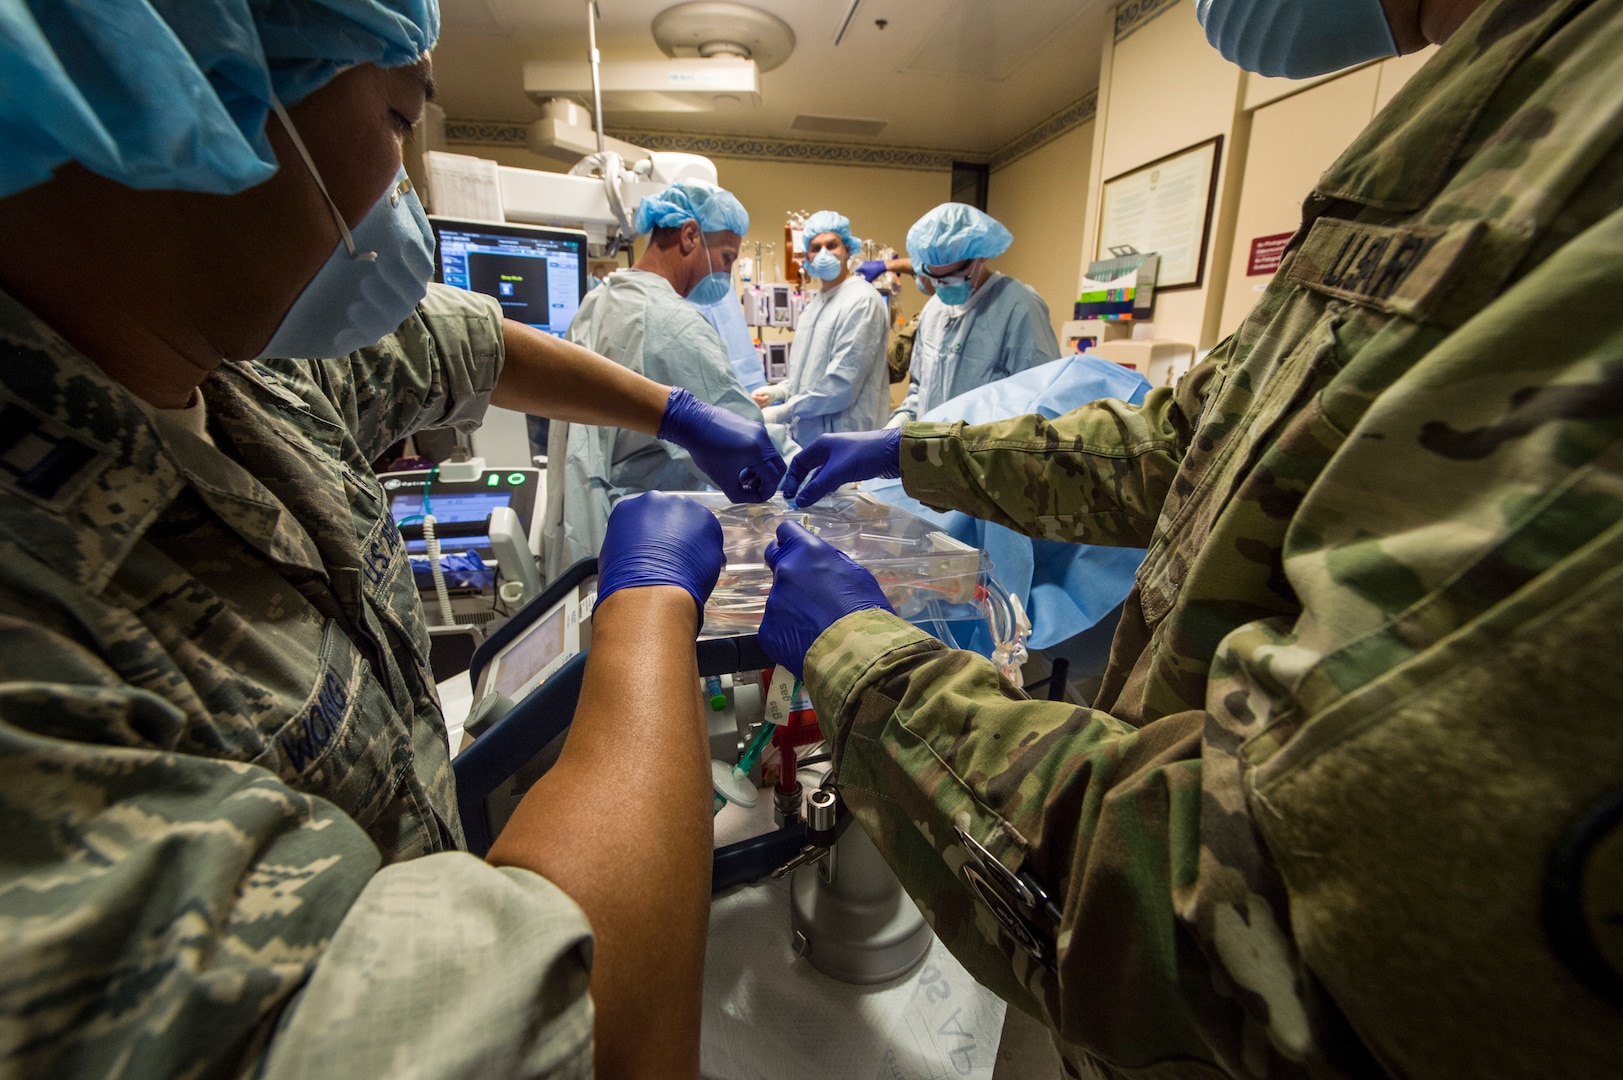 Members of the Acute Lung Resuce Team from the 59th Medical Wing, Joint Base San Antonio-Lackland, Texas, perform an Extra Corporeal Membrane Oxygenation procedure on a patient in El Paso, Texas, June, 10, 2018. The team is the Department of Defense's only medical evacuation team with ECMO capabilities. ECMO enables the team to safely transfer critically ill patients with severe heart and lung issues across long distances for further treatment.